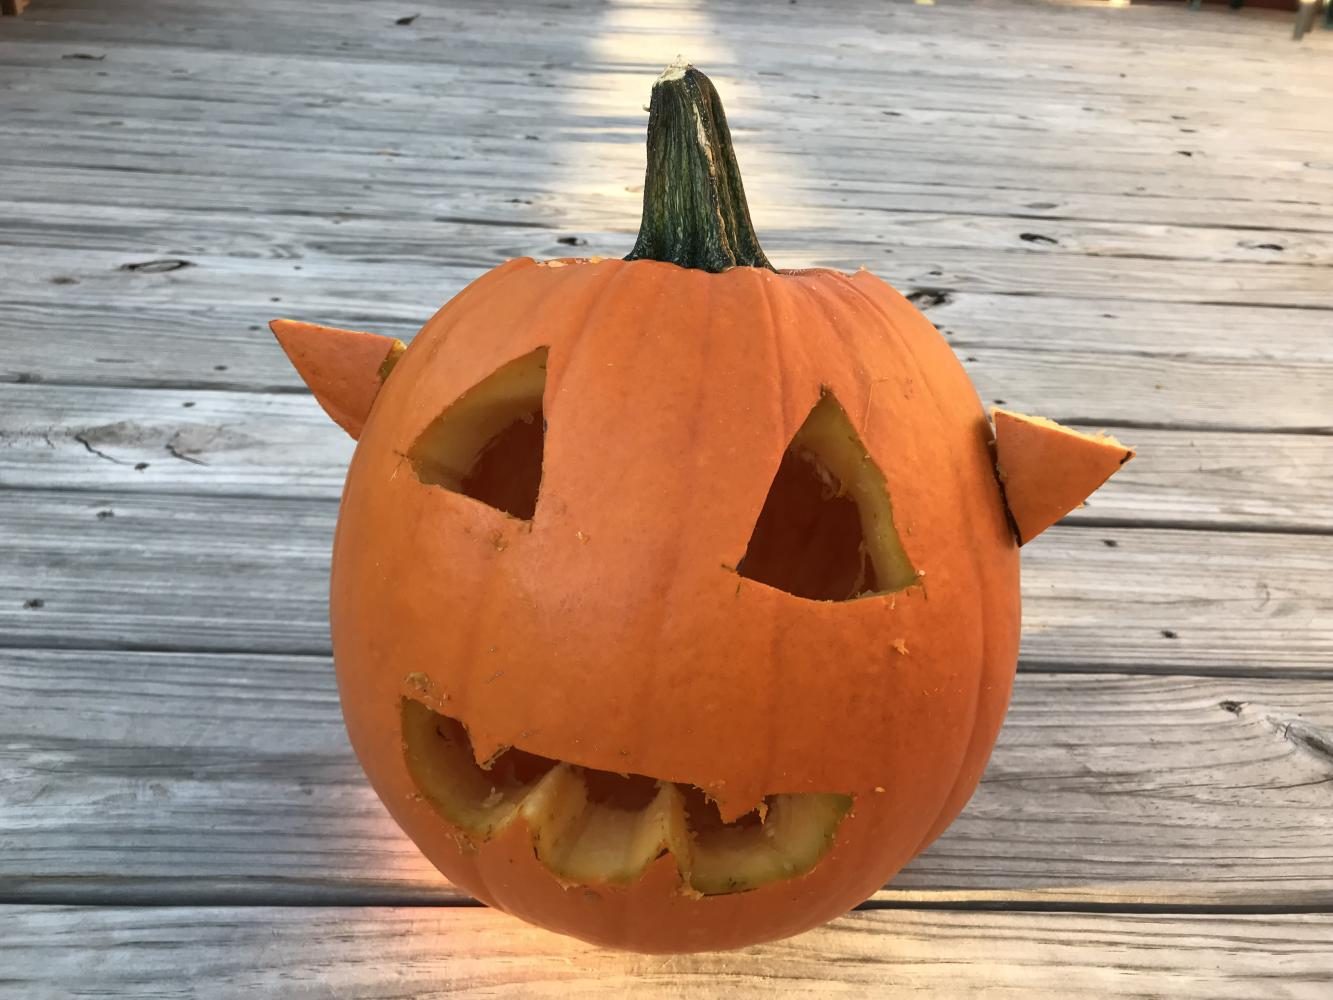 WHAT YOU NEED: 
Pumpkin (any size), pumpkin saw, something to scoop the inside of the pumpkin with, and a sharpie. 